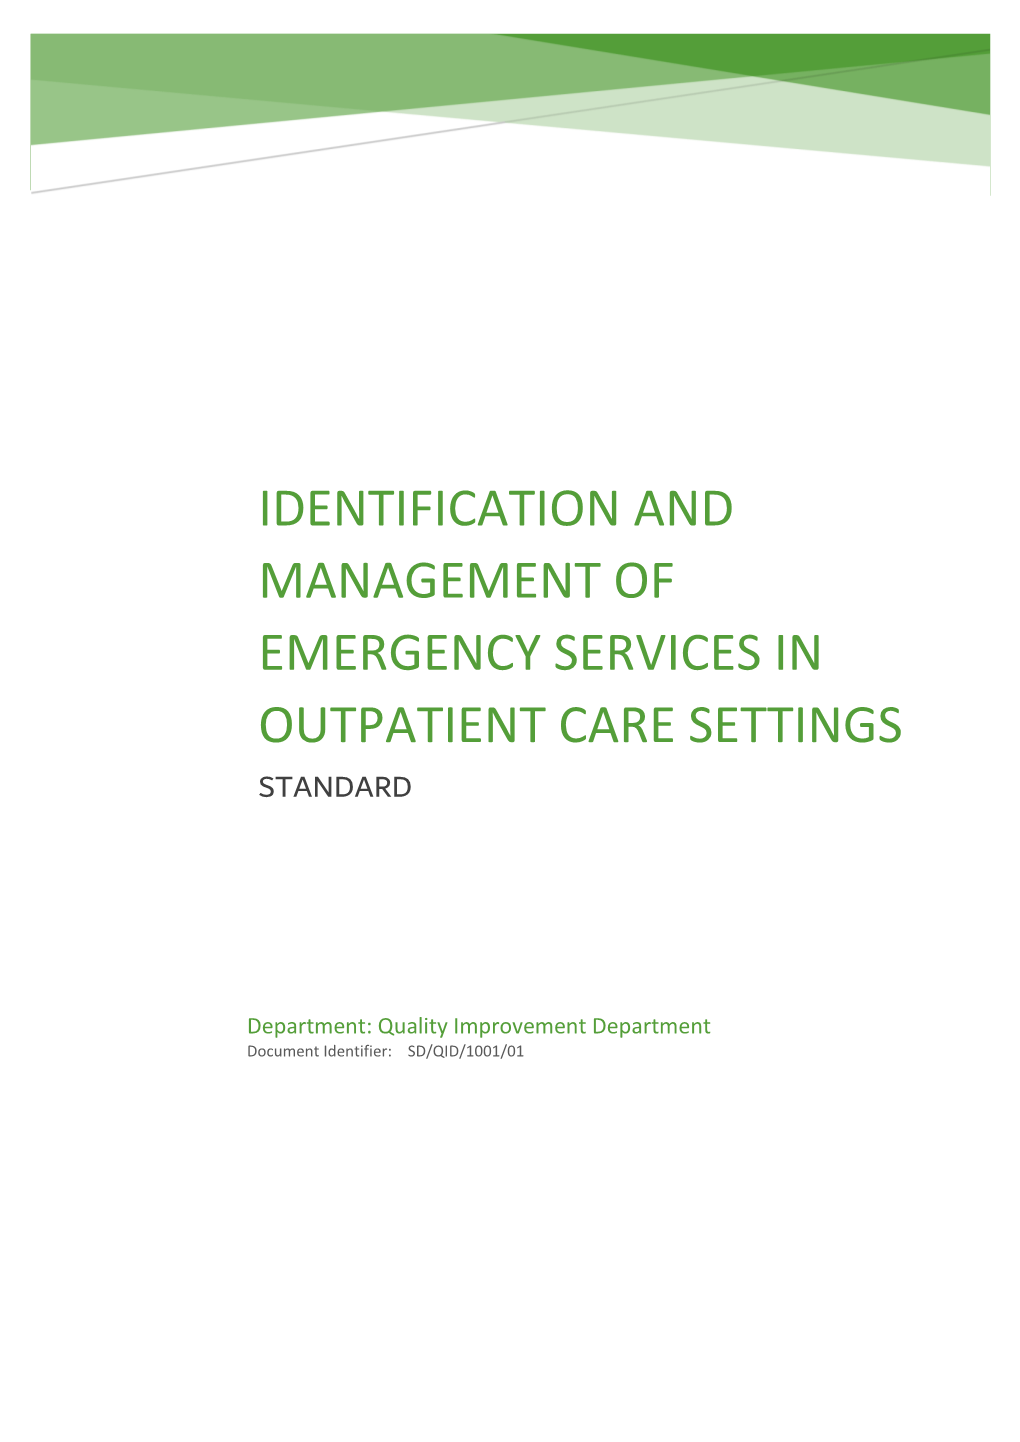 Identification and Management of Emergency Services in Outpatient Care Settings Standard